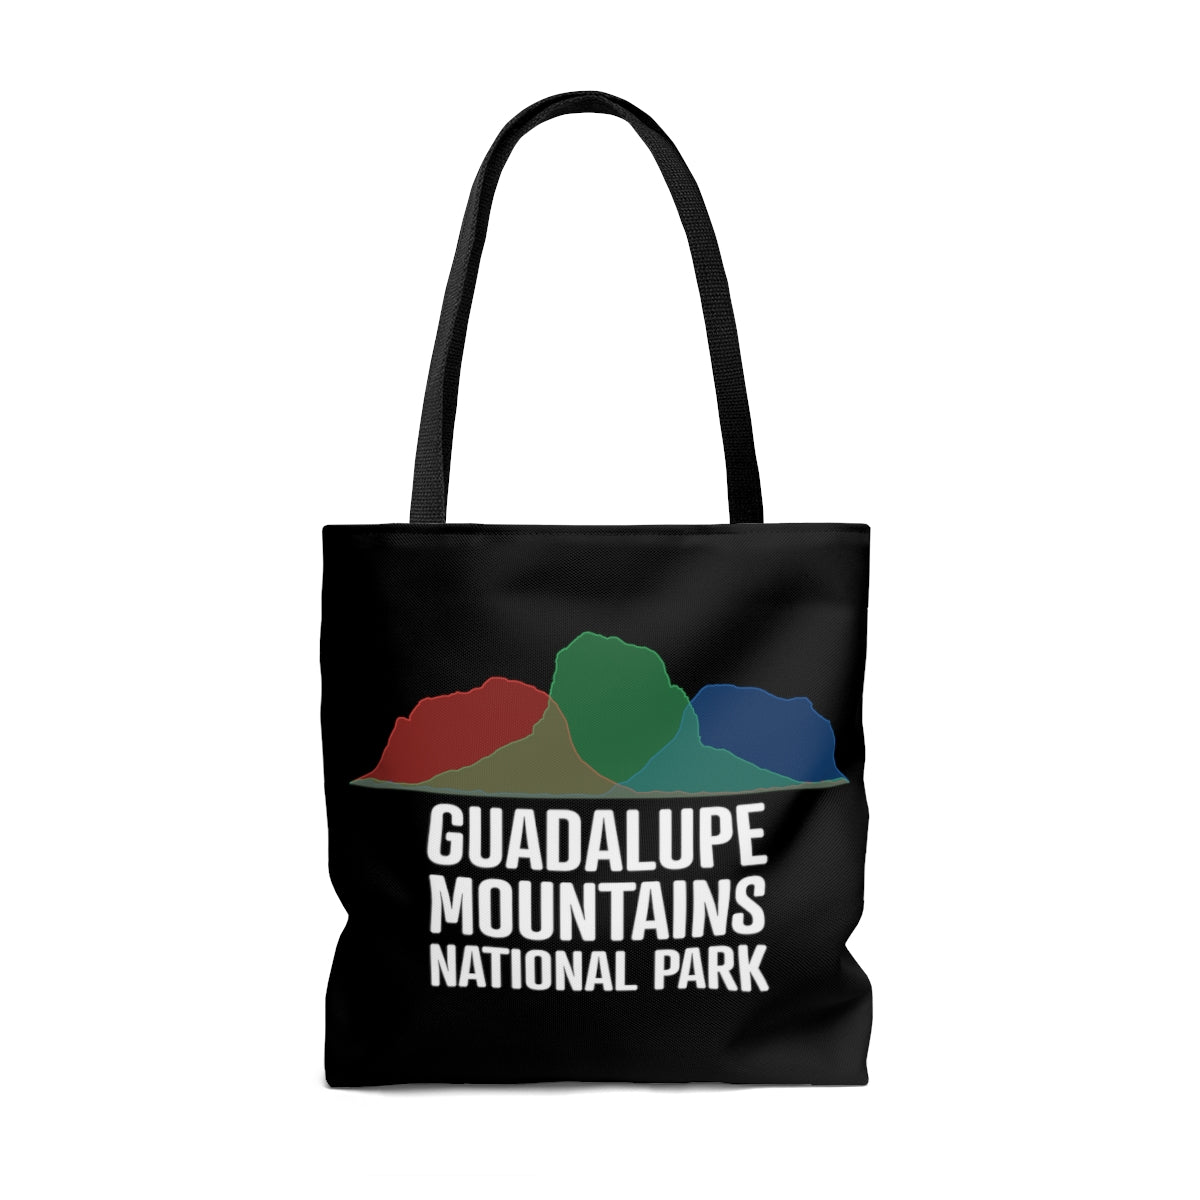 Guadalupe Mountains National Park Tote Bag - Histogram